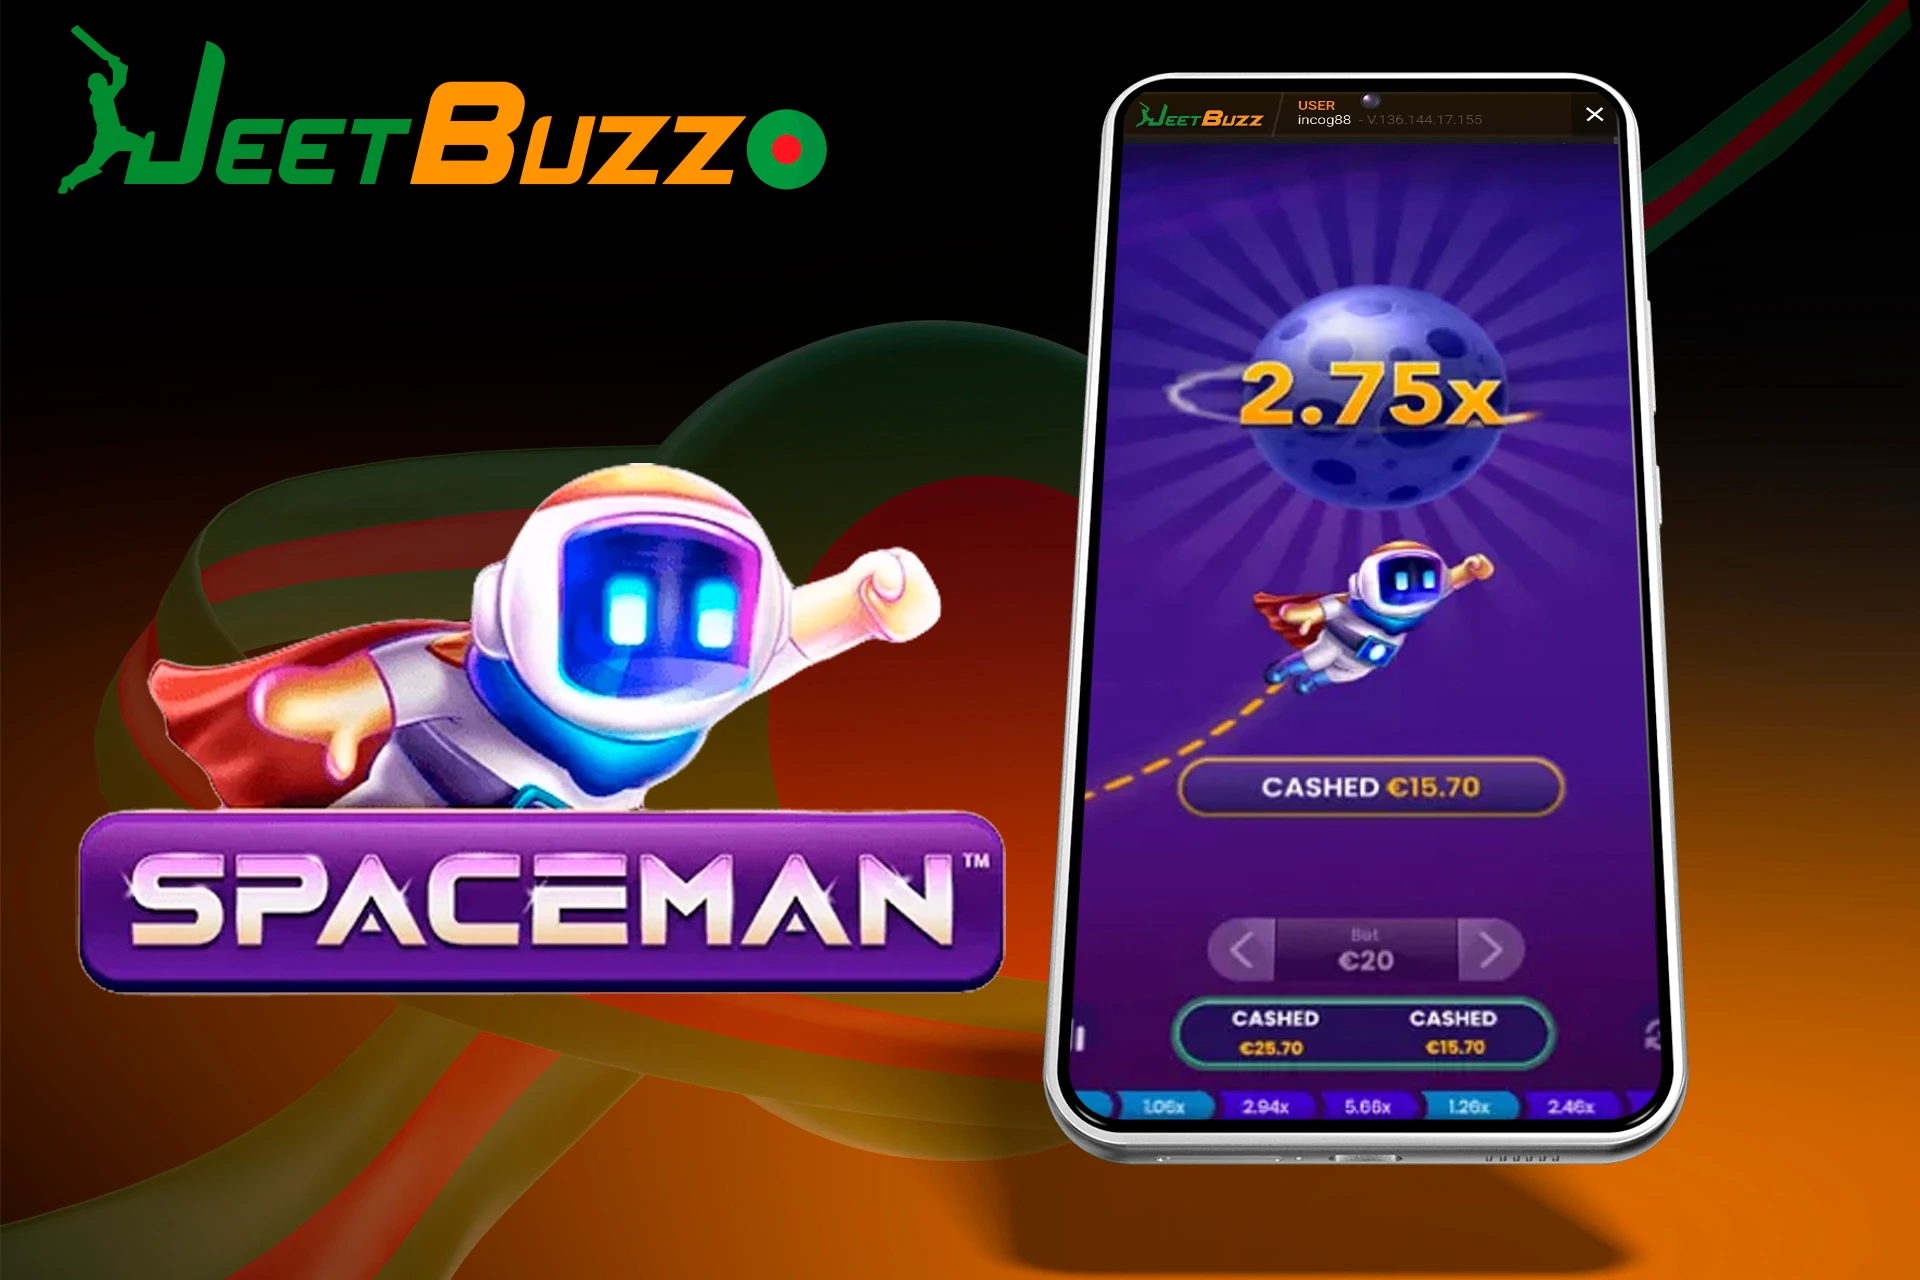 Key features and benefits of Spaceman